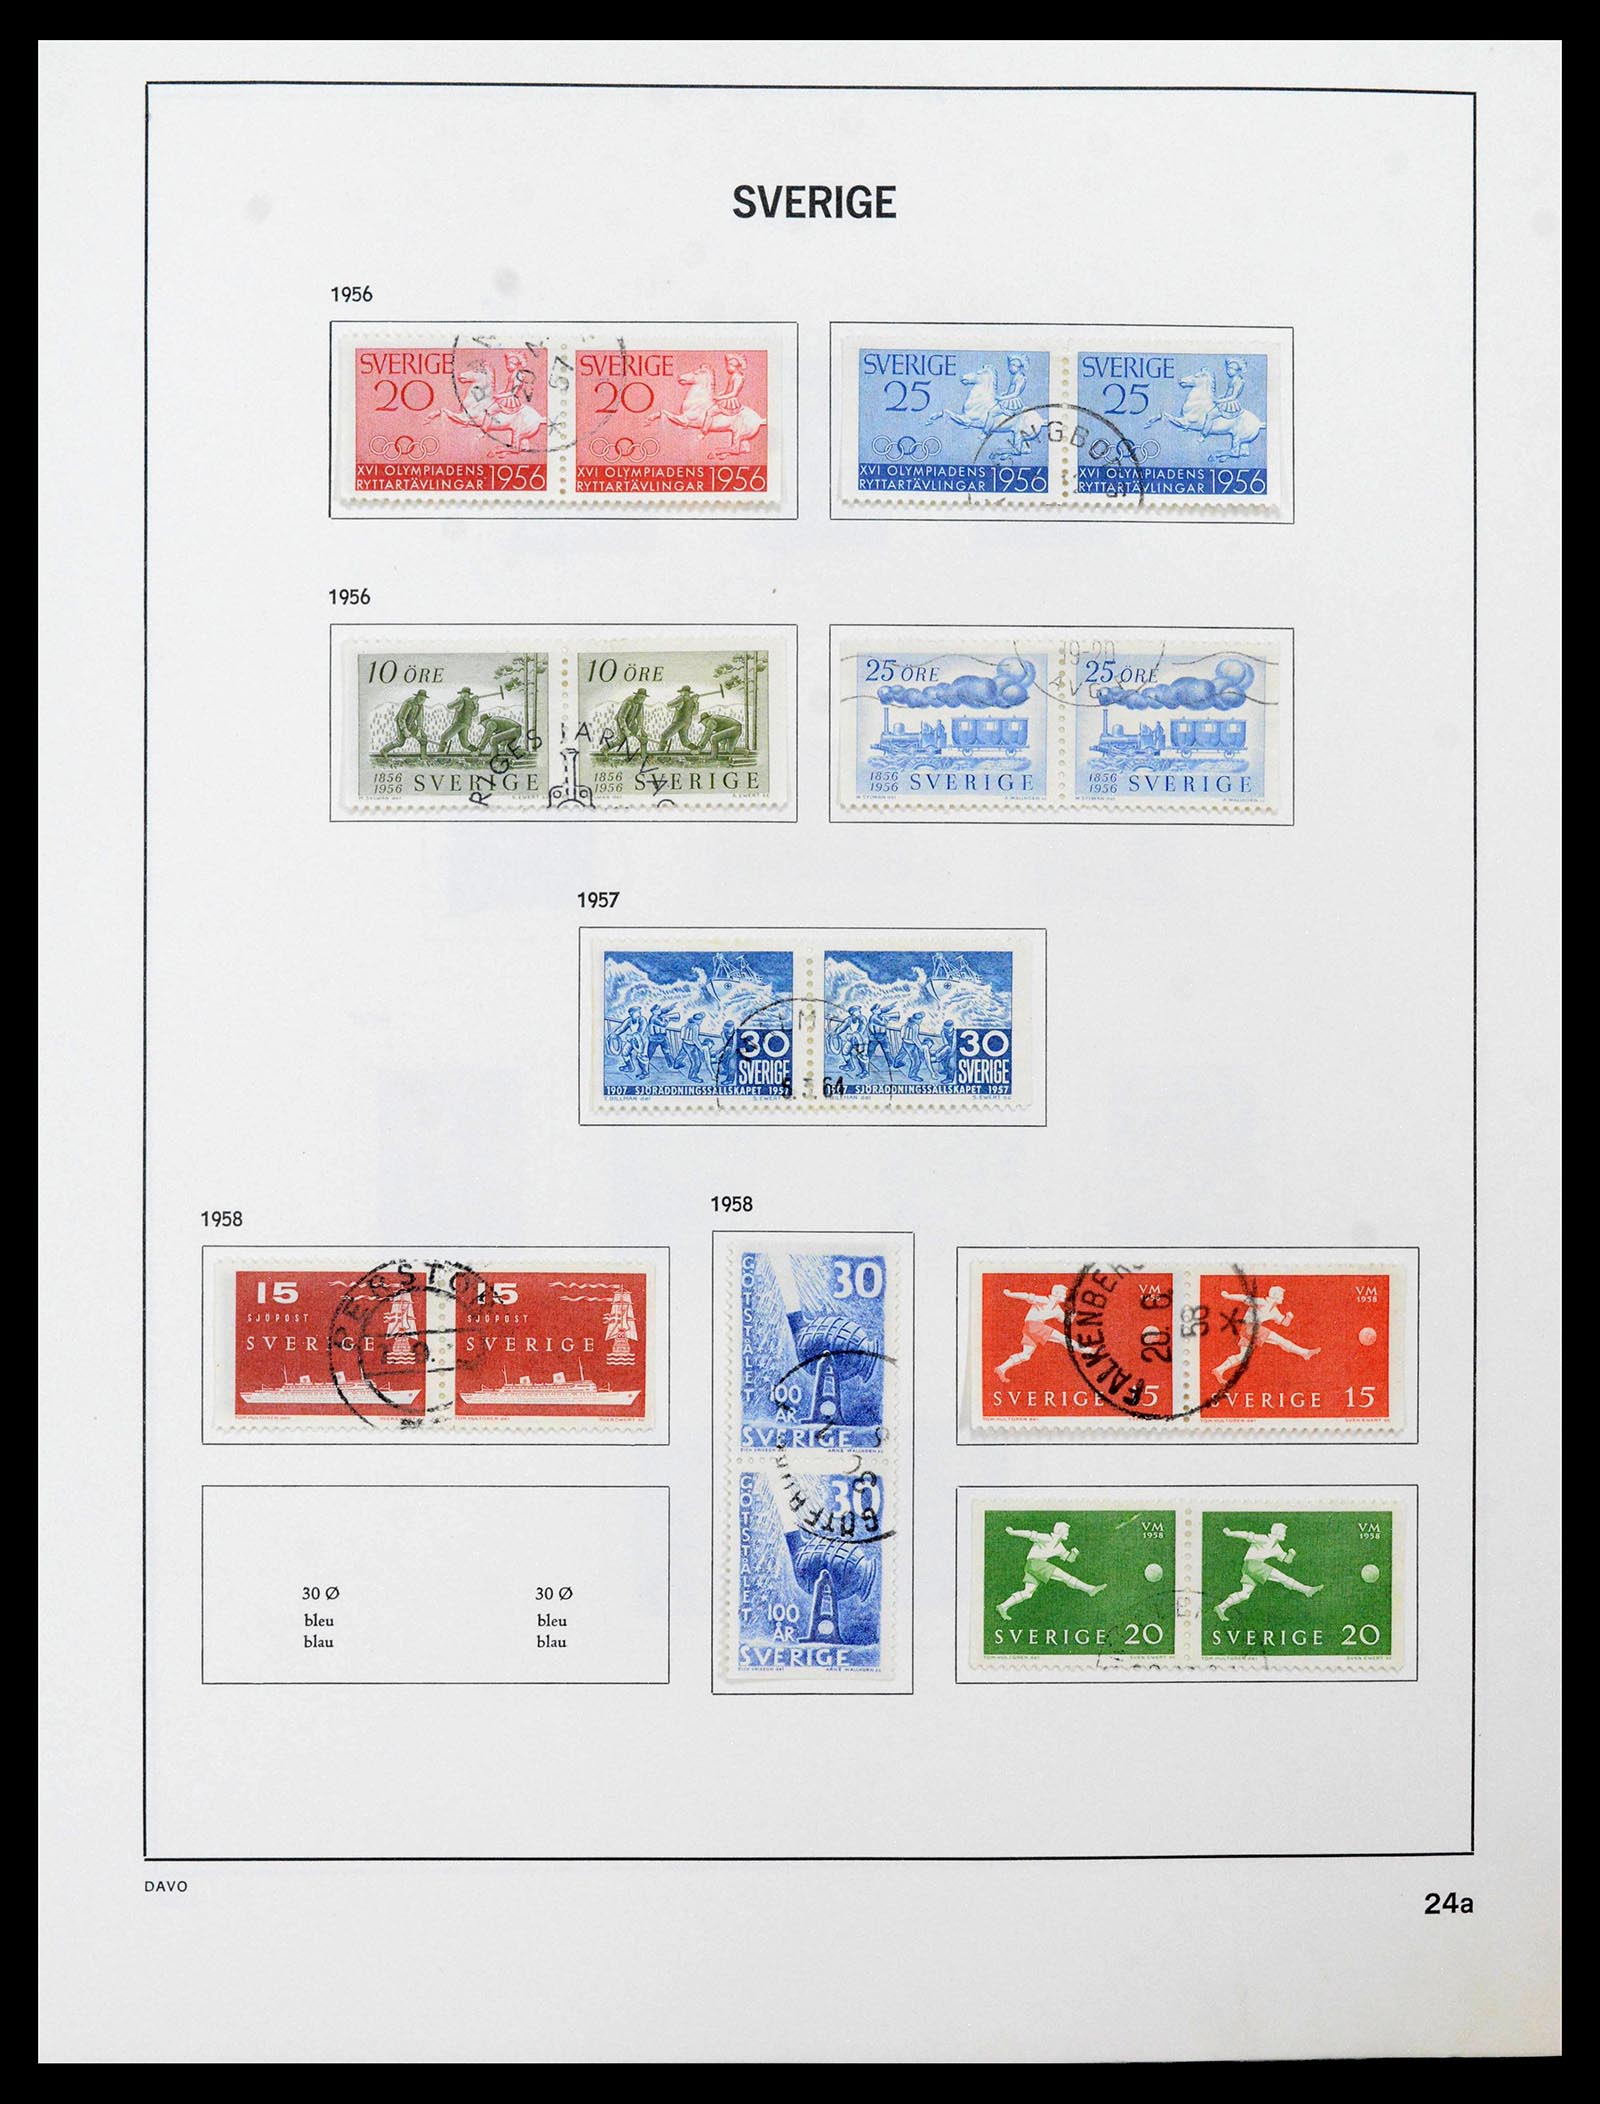 39331 0034 - Stamp collection 39331 Sweden 1855-2005.